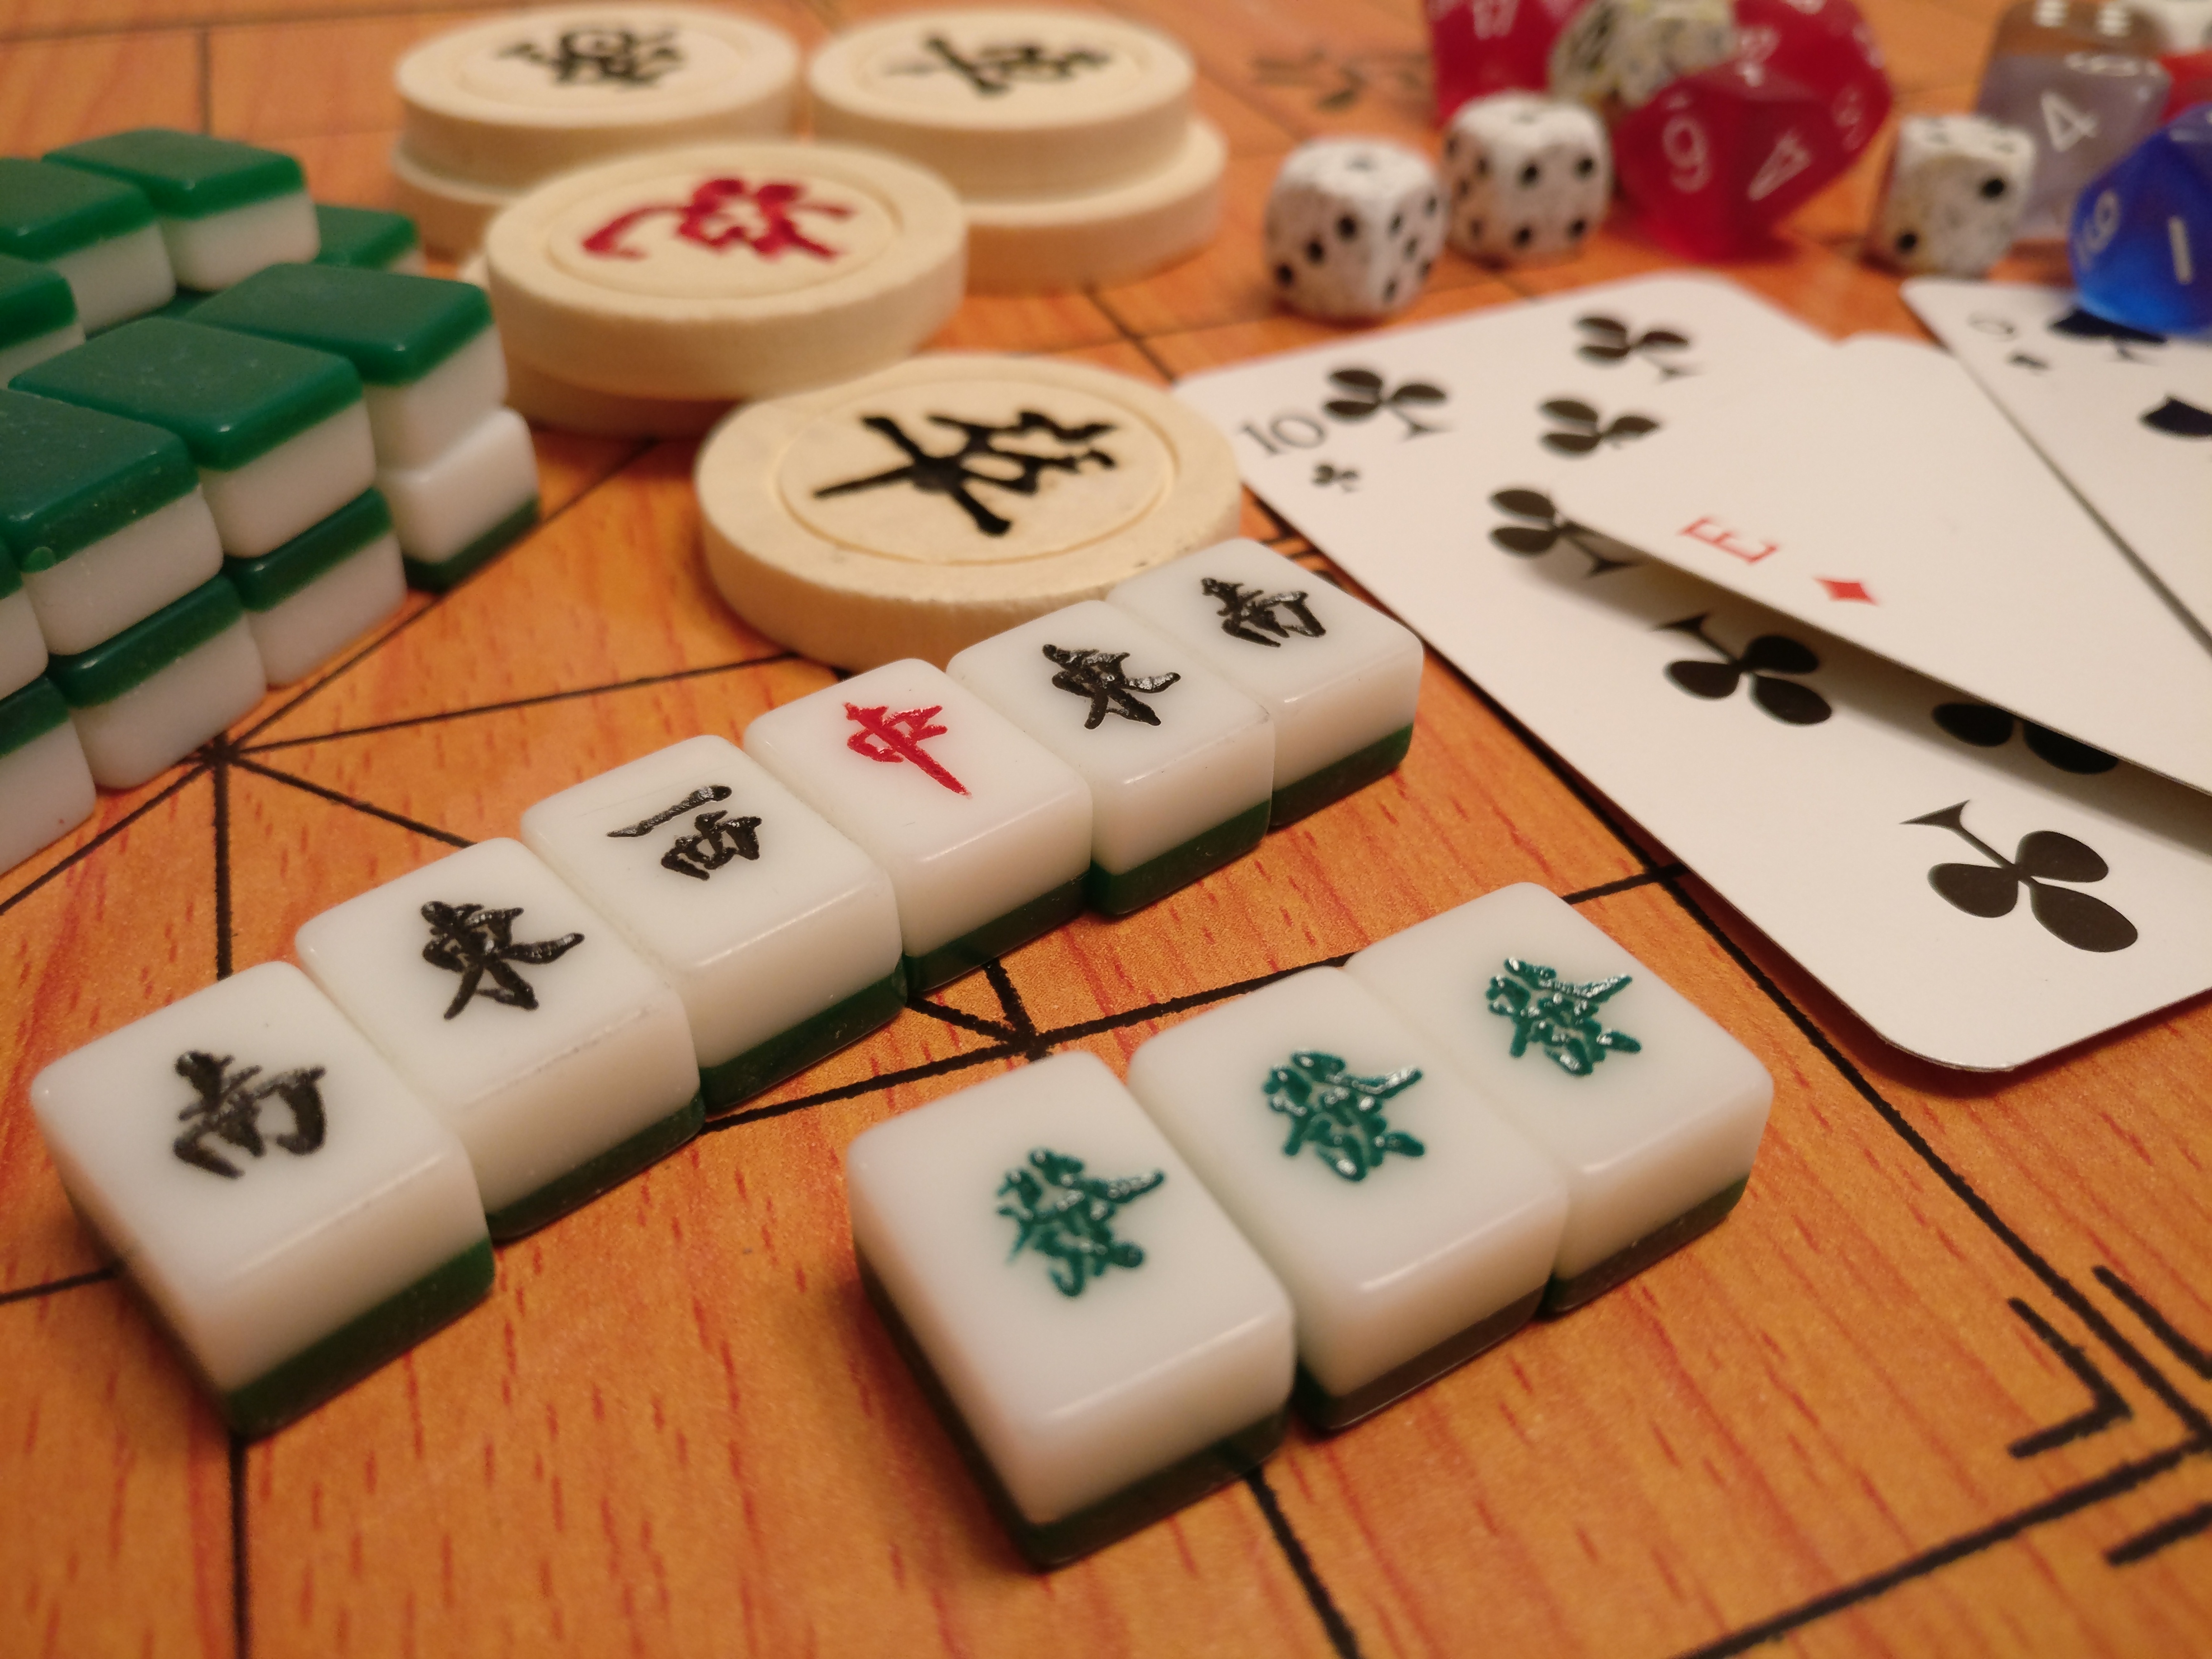 10 ways of using games to learn and teach Chinese | Hacking Chinese |  Hacking Chinese